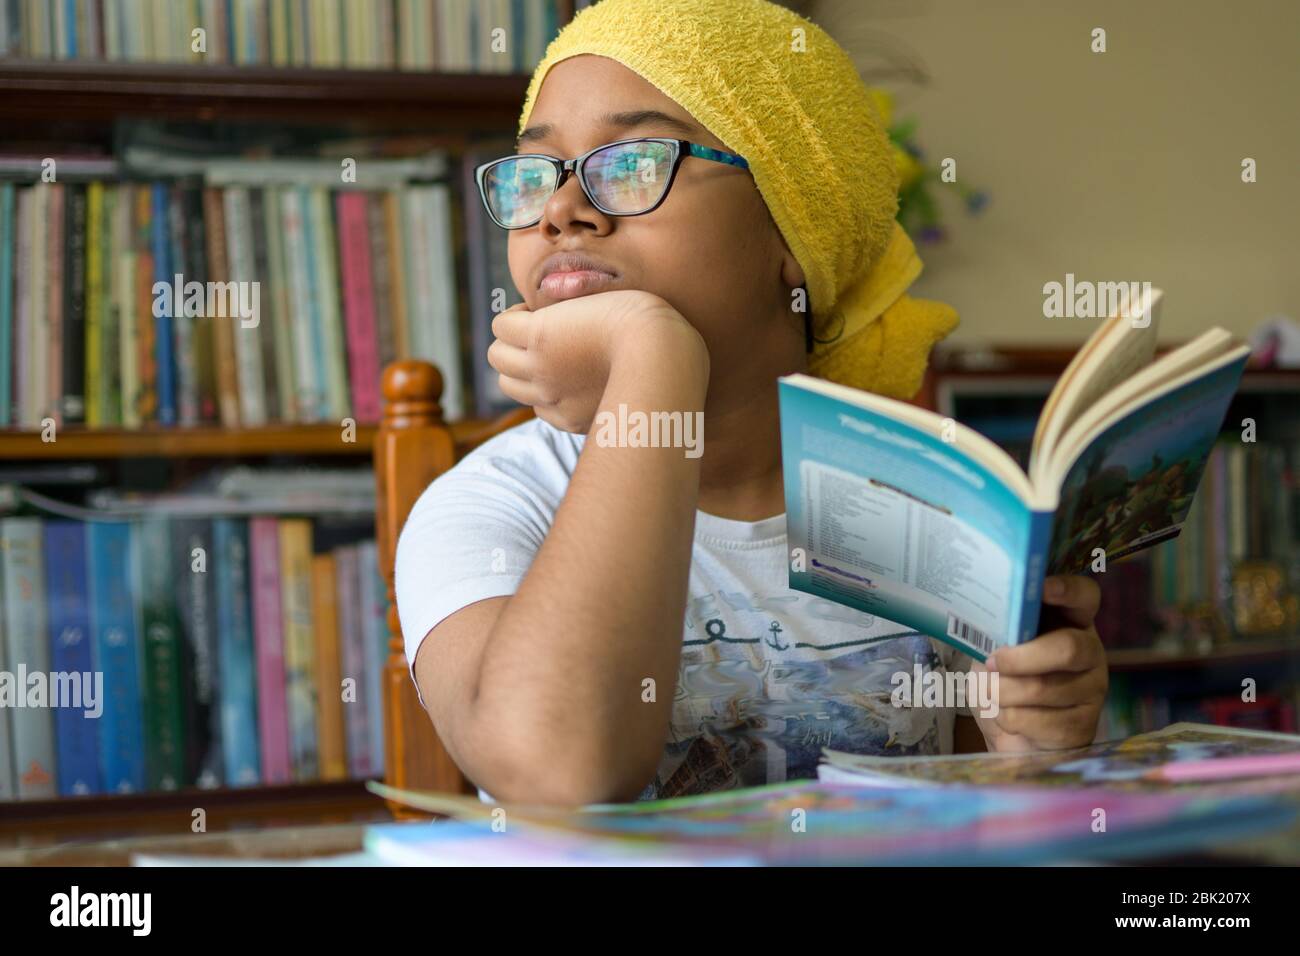 Cute little Indian school girl studying at home during lock down period due to Corona Virus pandemic Stock Photo